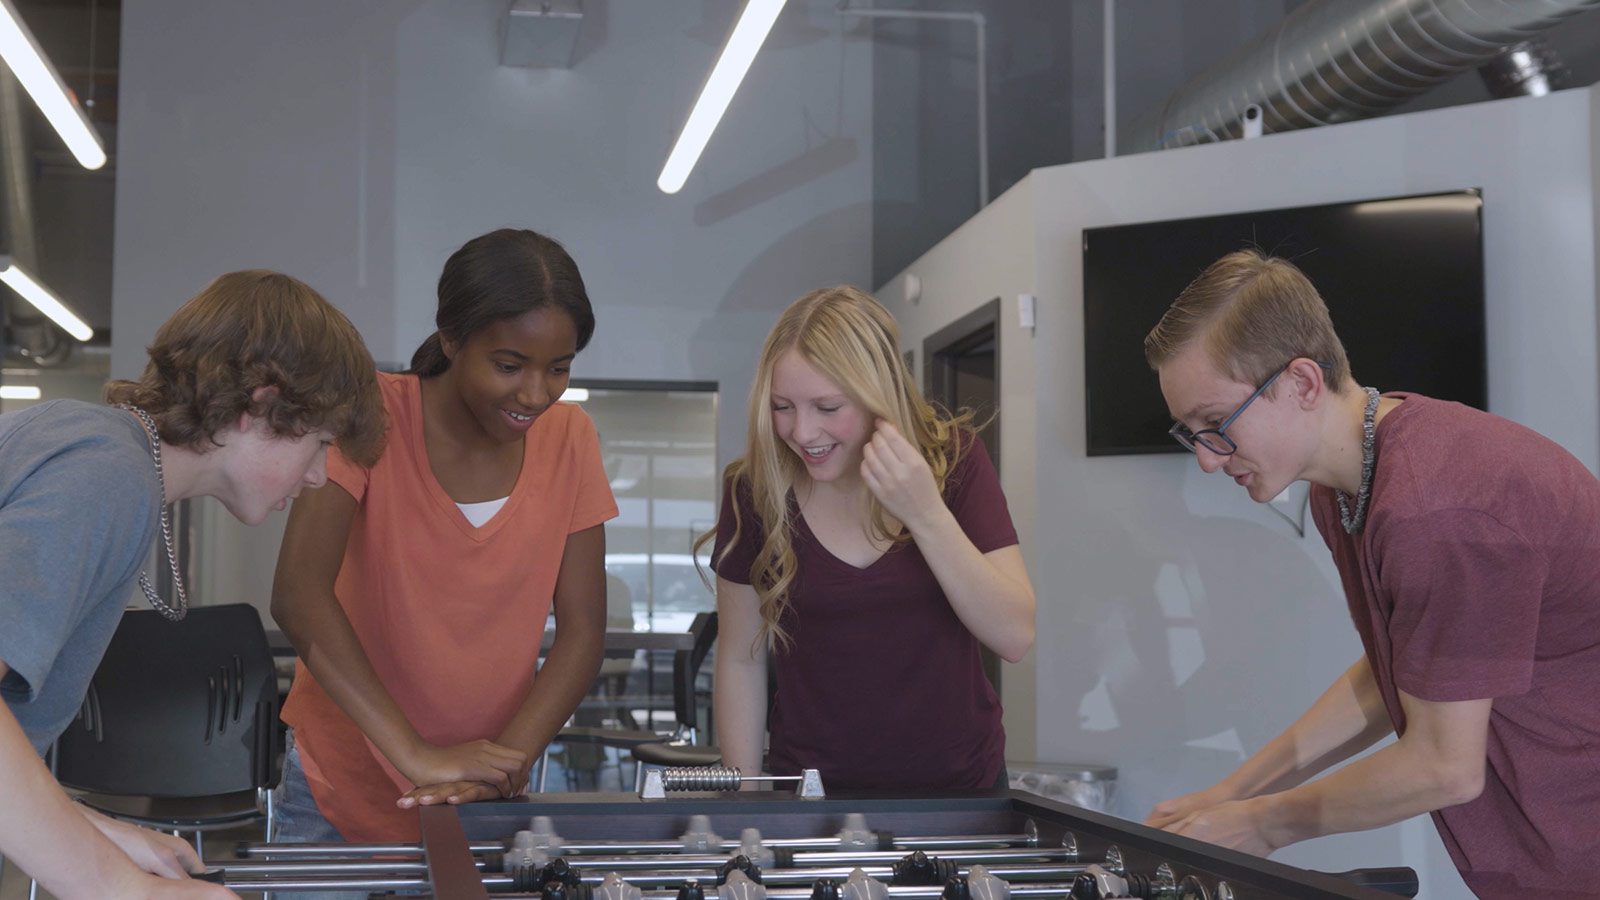 Teenagers smiling and playing foosball in a bright, contemporary recreational space.